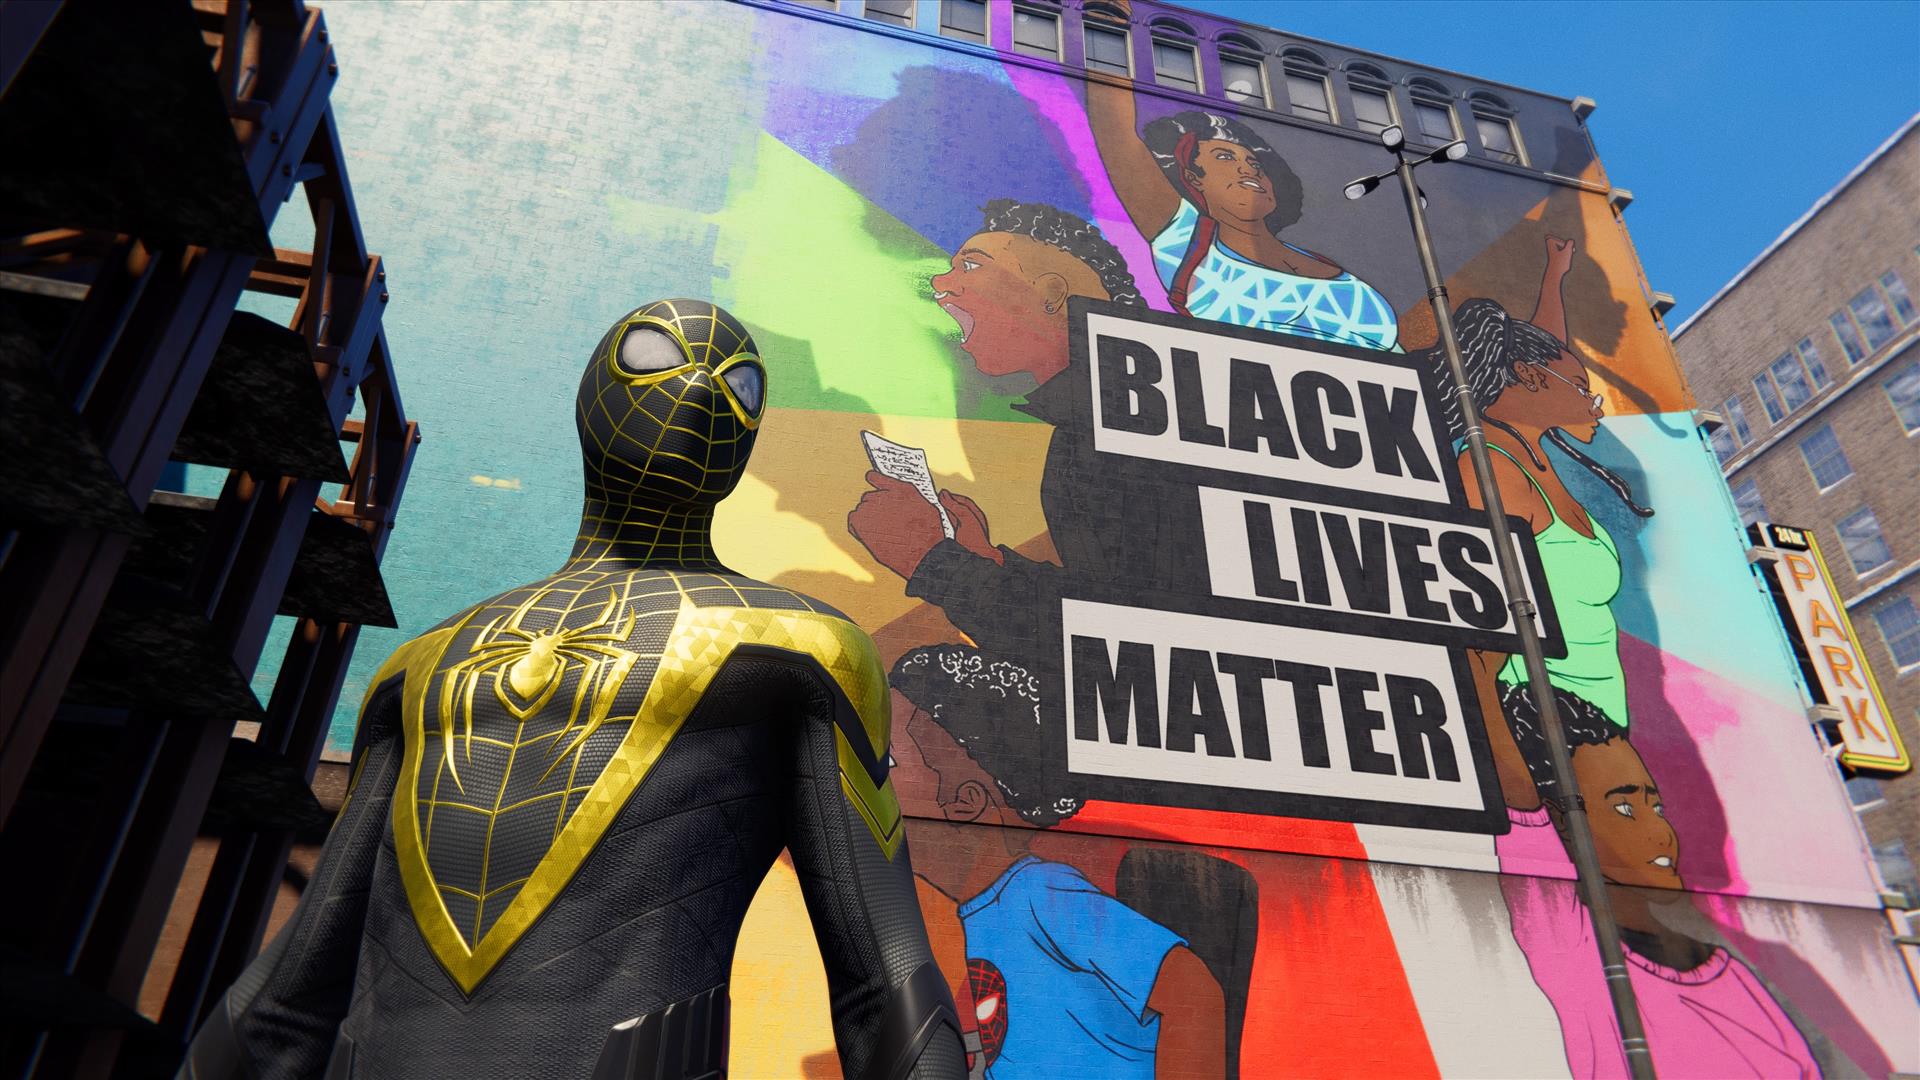 Spider-Man: Miles Morales' Ultimate Edition Is The Only Way To Get Spider-Man  Remastered